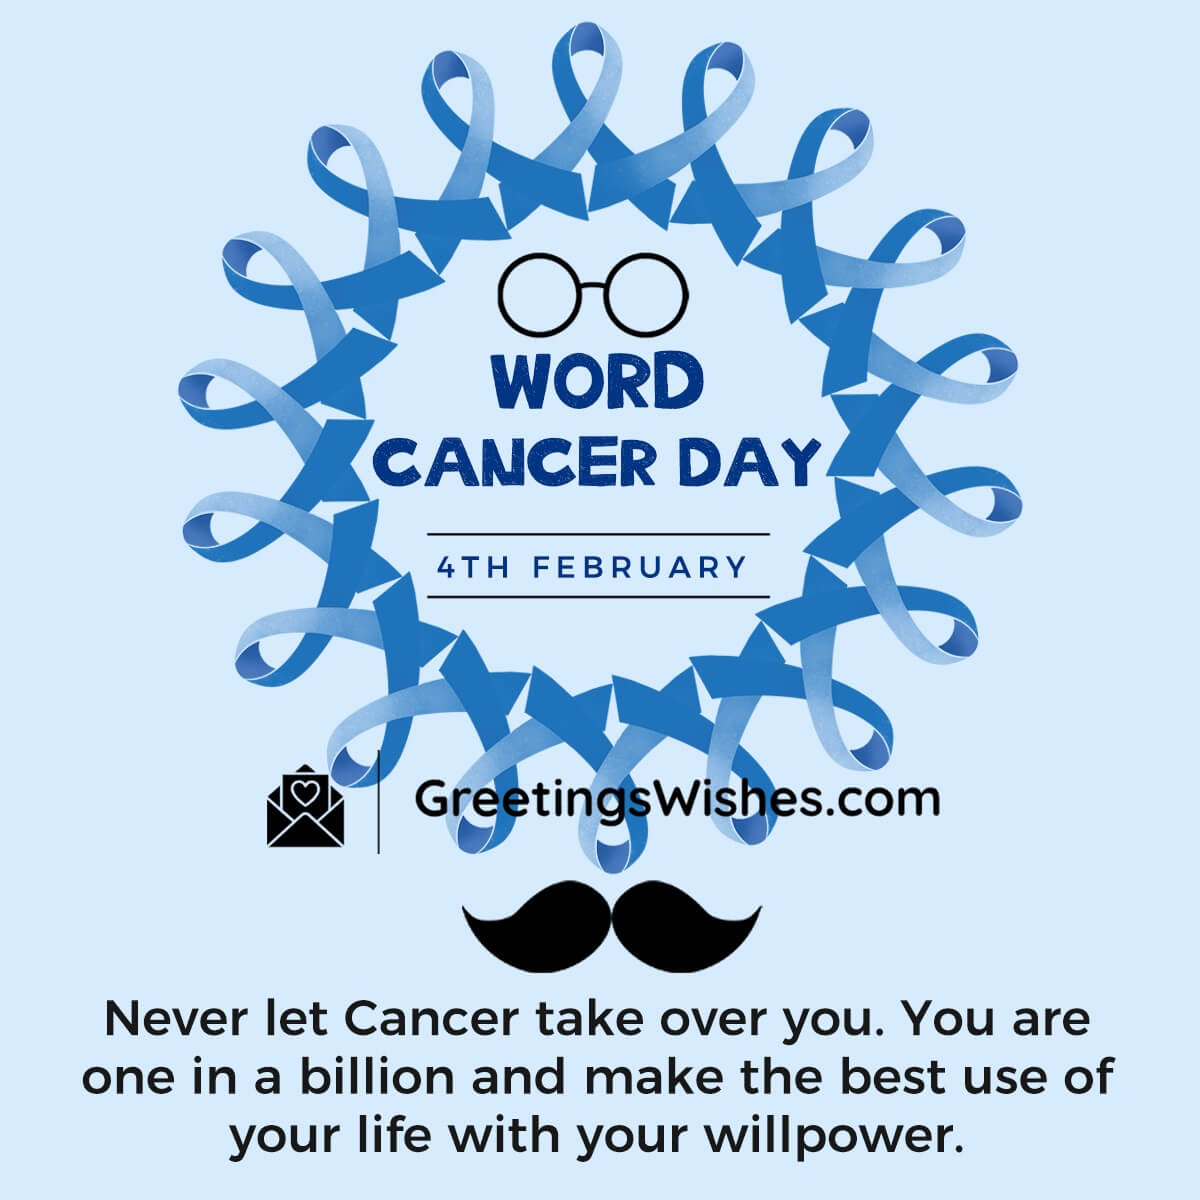 World Cancer Day Message